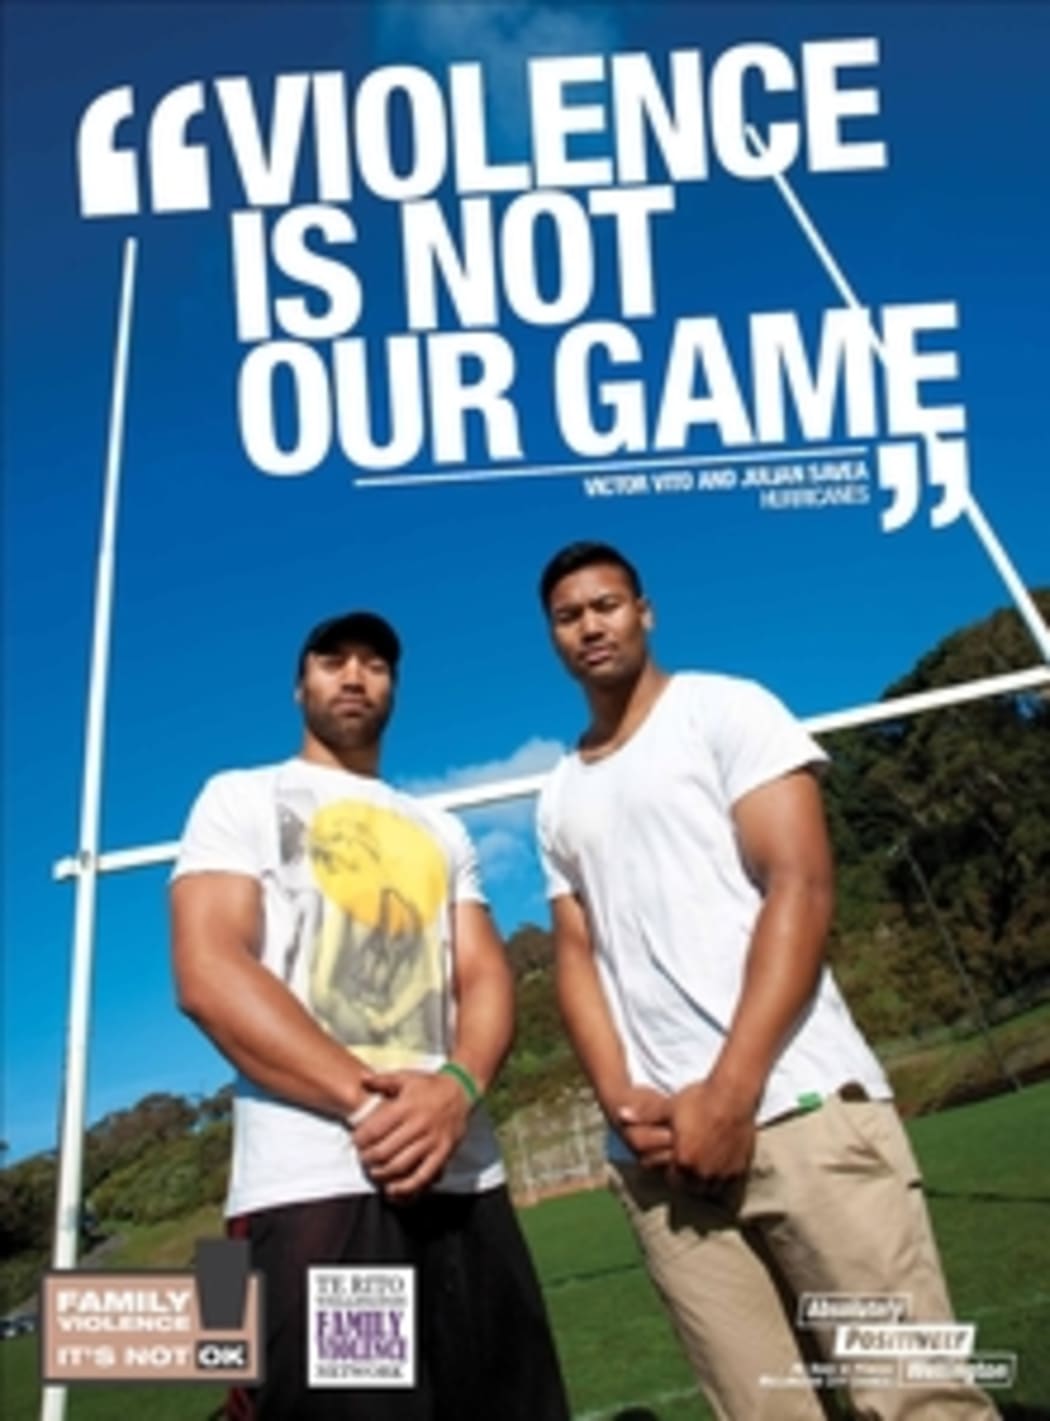 Julian Savea featured in the "It's Not OK!" campaign against family violence